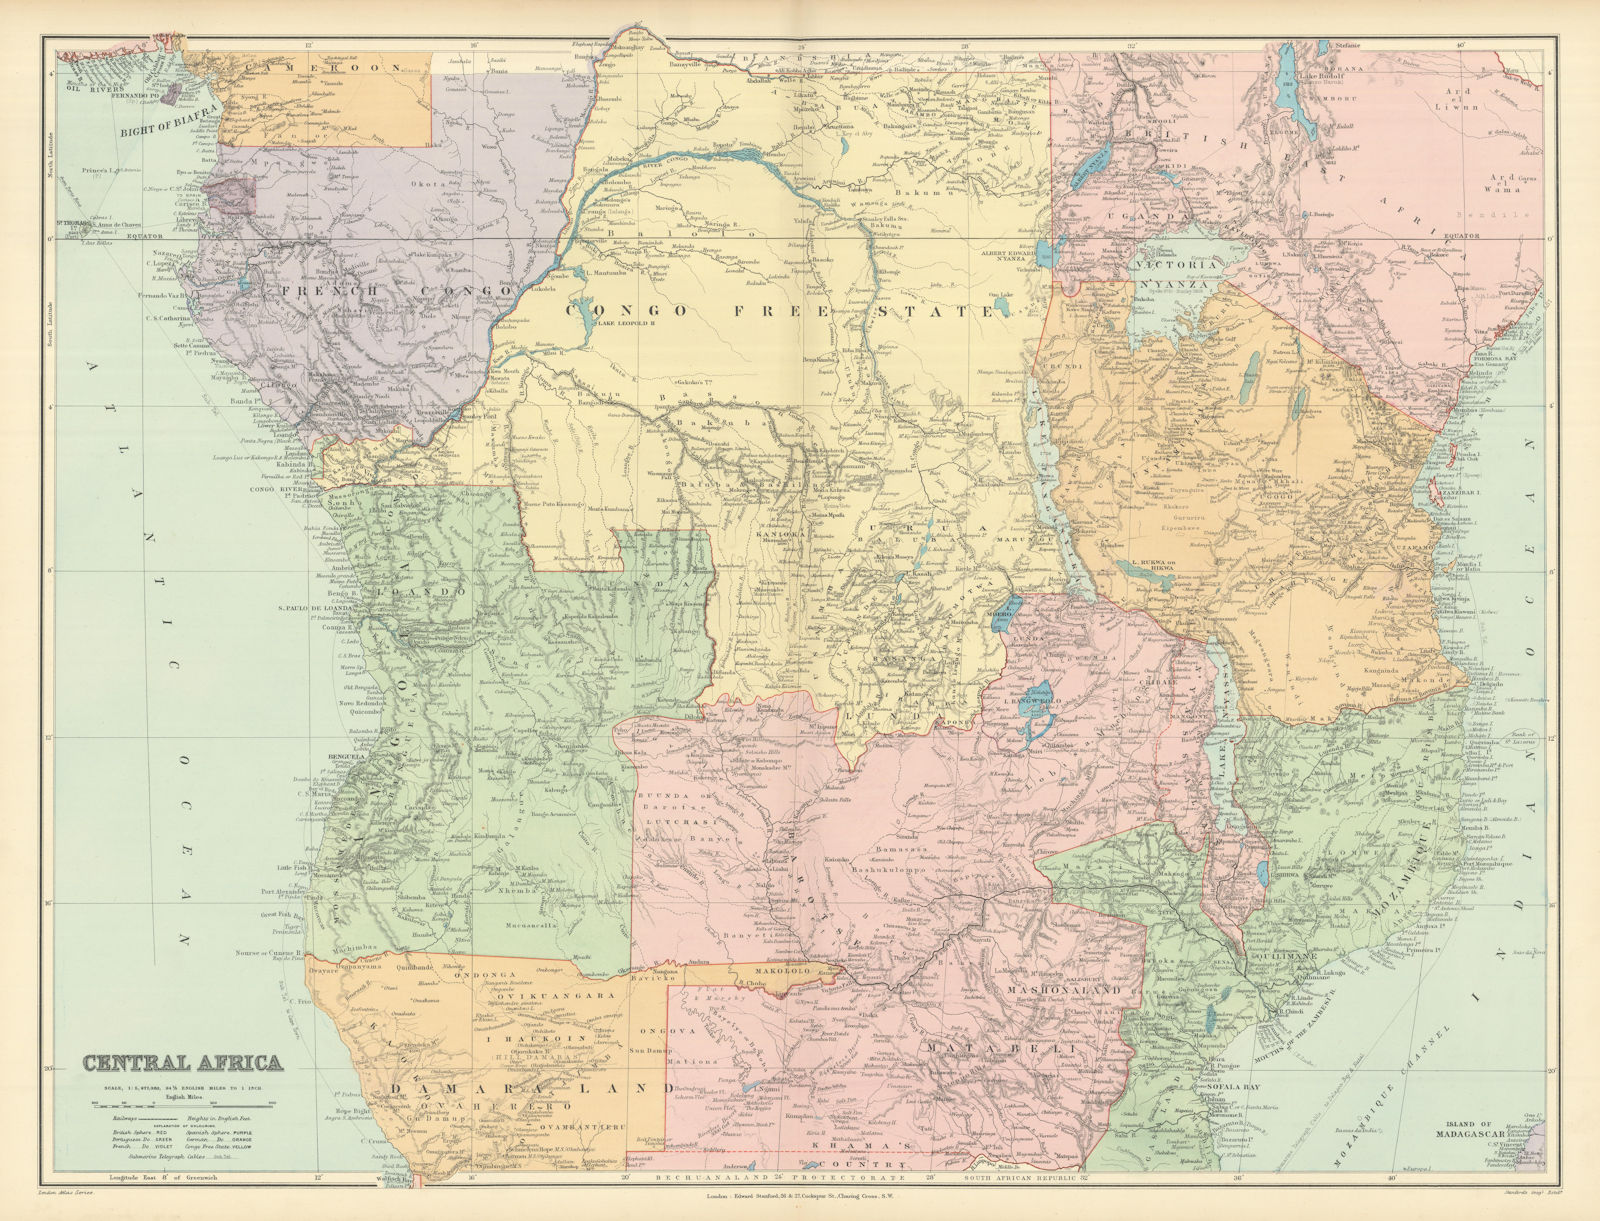 Central Africa. Congo Free State Rhodesia German East Africa. STANFORD 1894 map